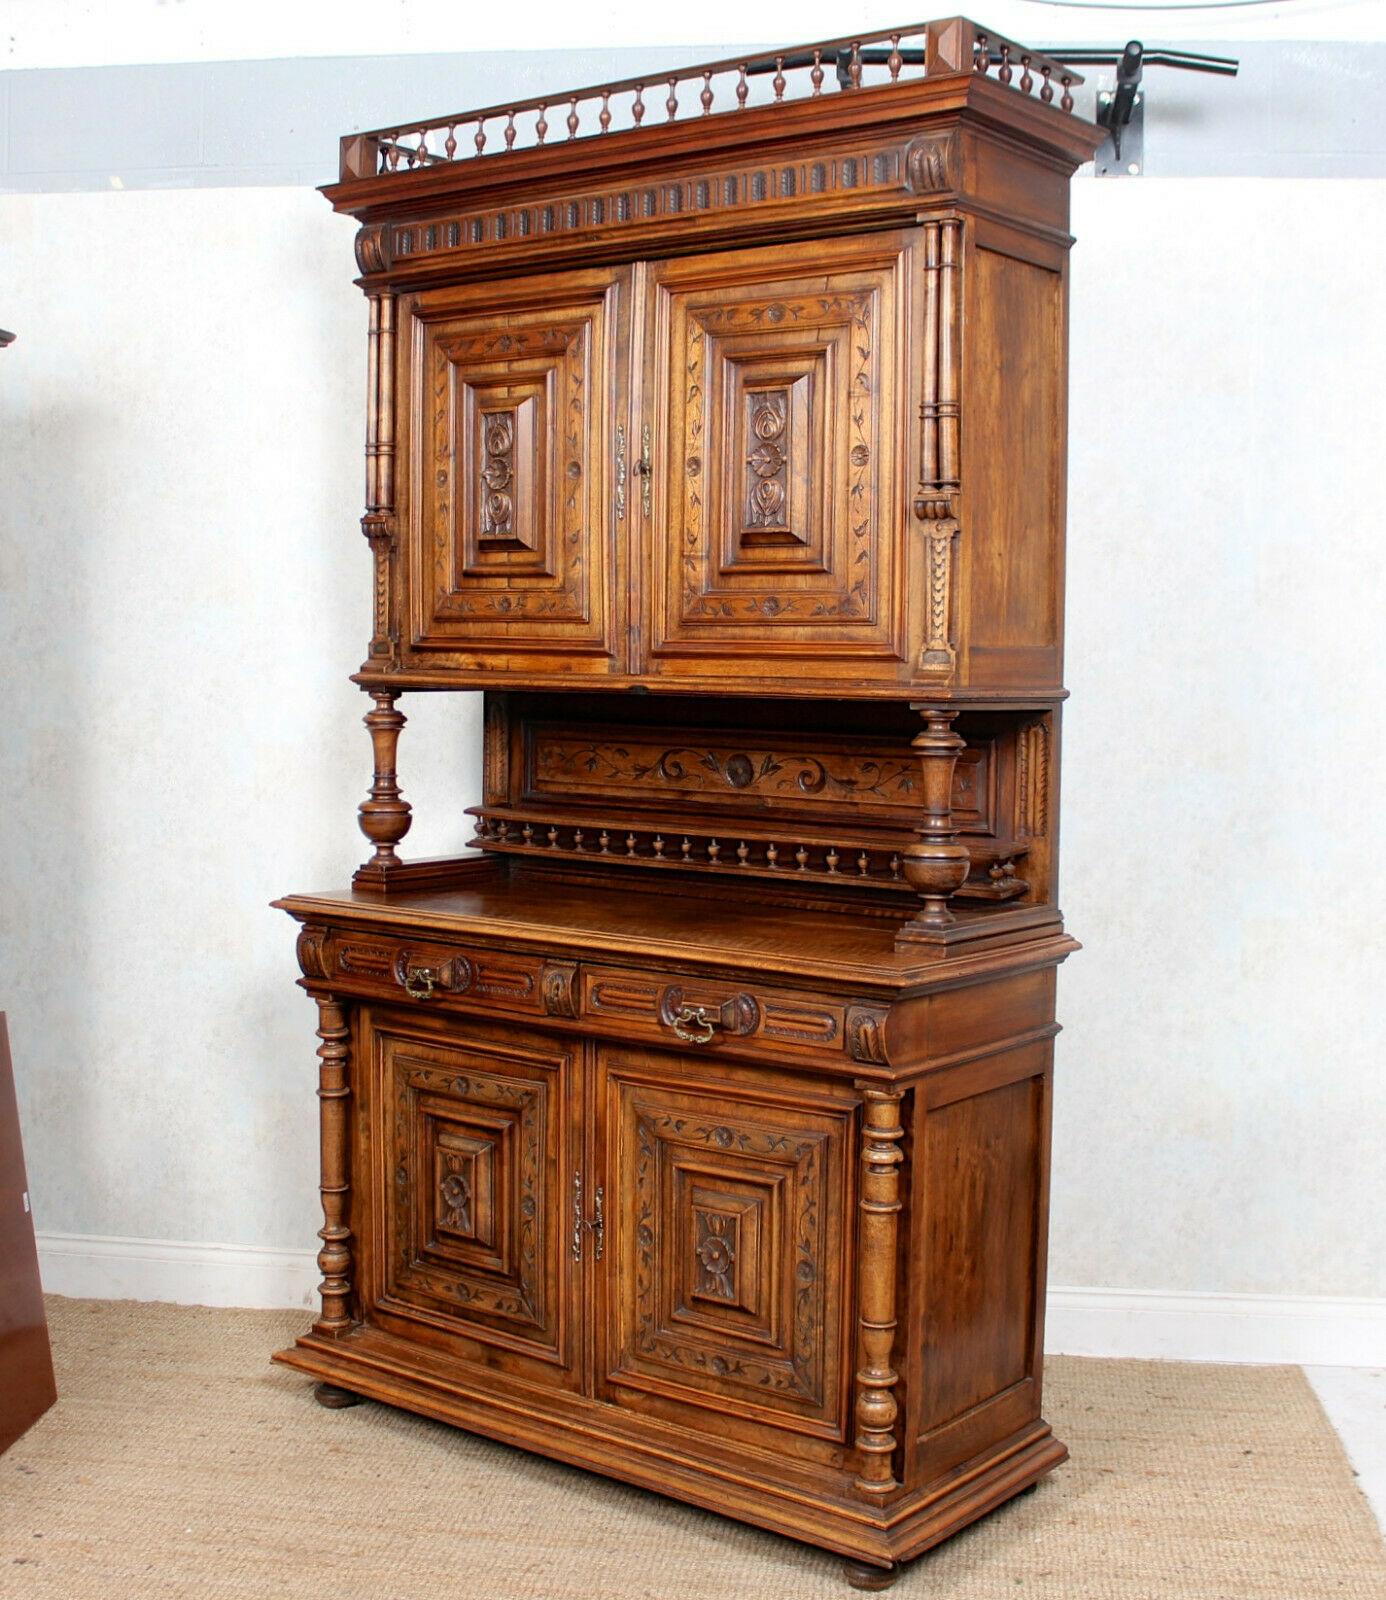 A fine quality 19th century German carved walnut cabinet.
The gallery top above two large foliate cushion carved and moulded doors enclosed removable shelving, carved back panel and gallery flanked and raised on turned reeded columns. The lower